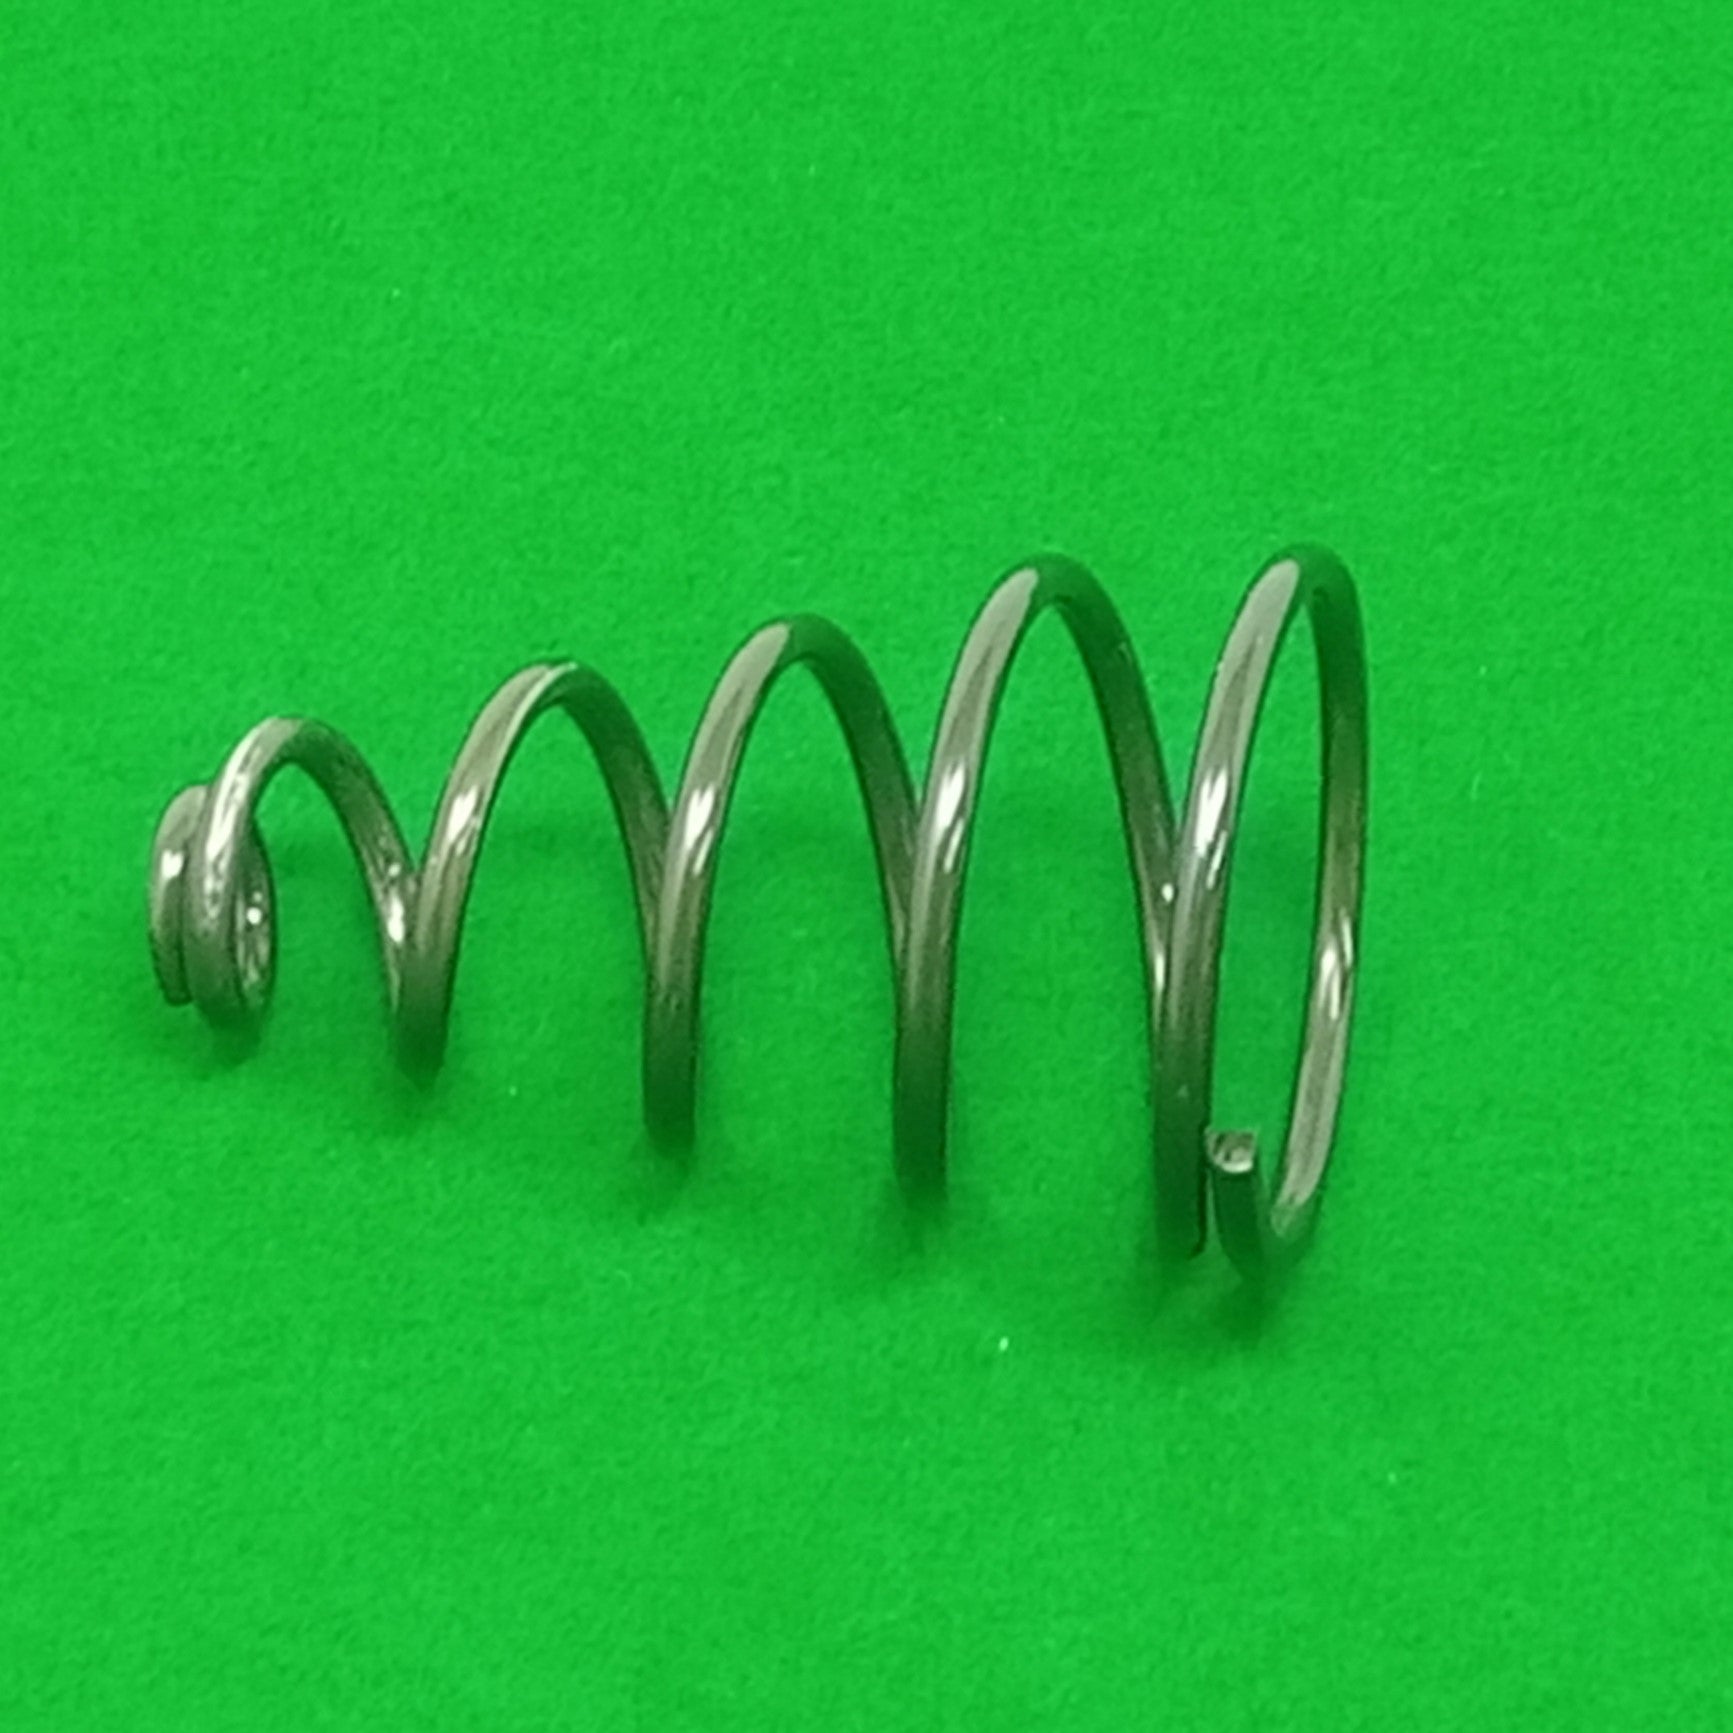 Mechanism Base Compression Spring - see options / part numbers